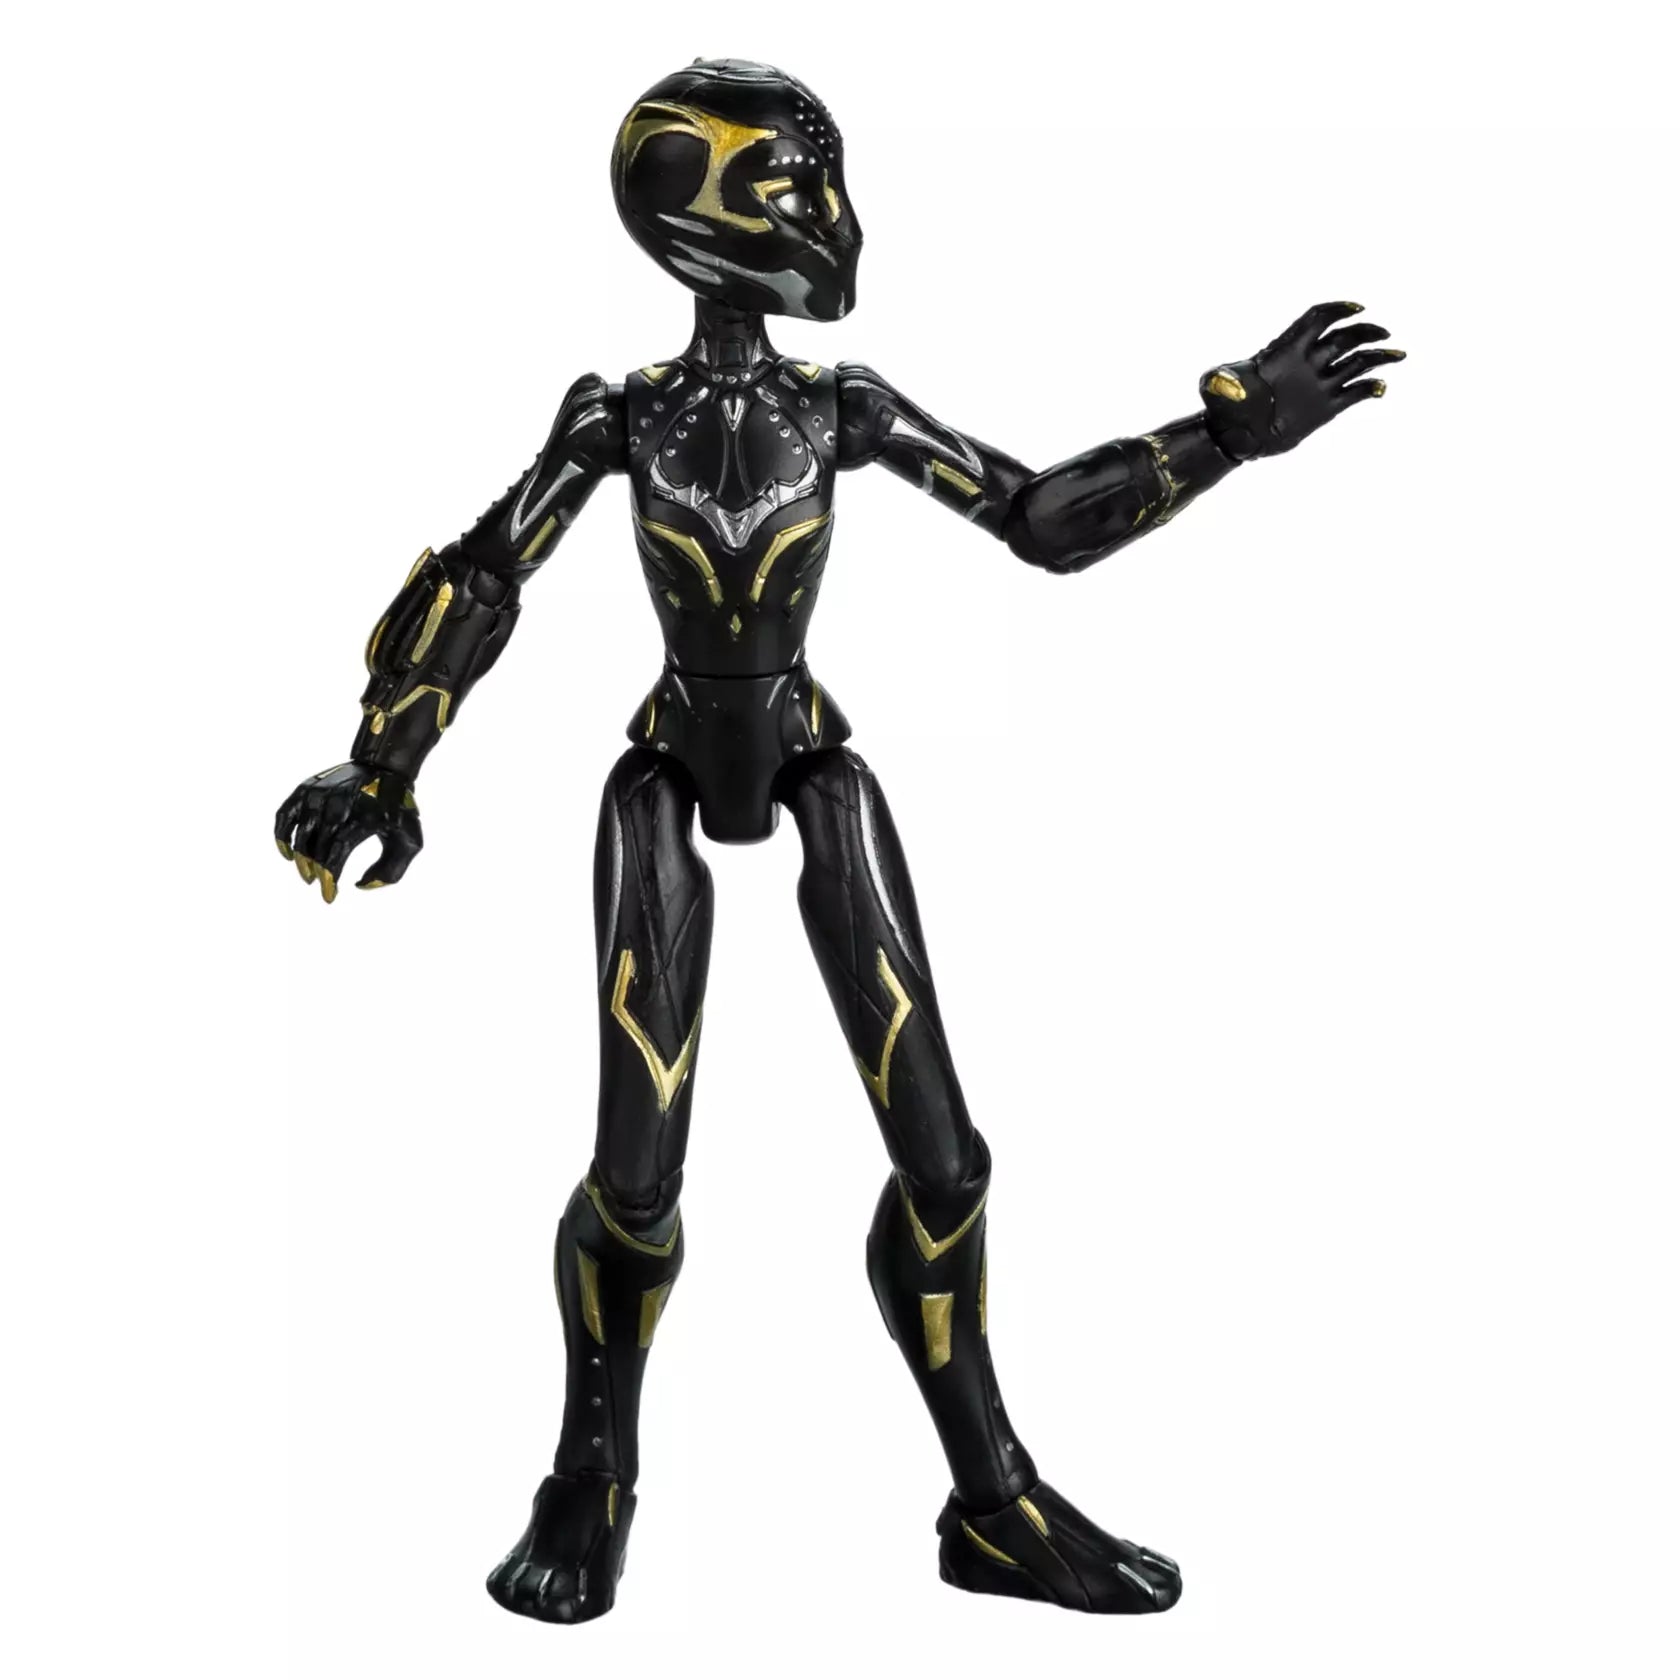 Disney Black Panther and Namor Action Figure Set – Marvel Toybox - BumbleToys - 18+, 4+ Years, 5-7 Years, Action Figures, Boys, Characters, Marvel, Pre-Order, Wakanda